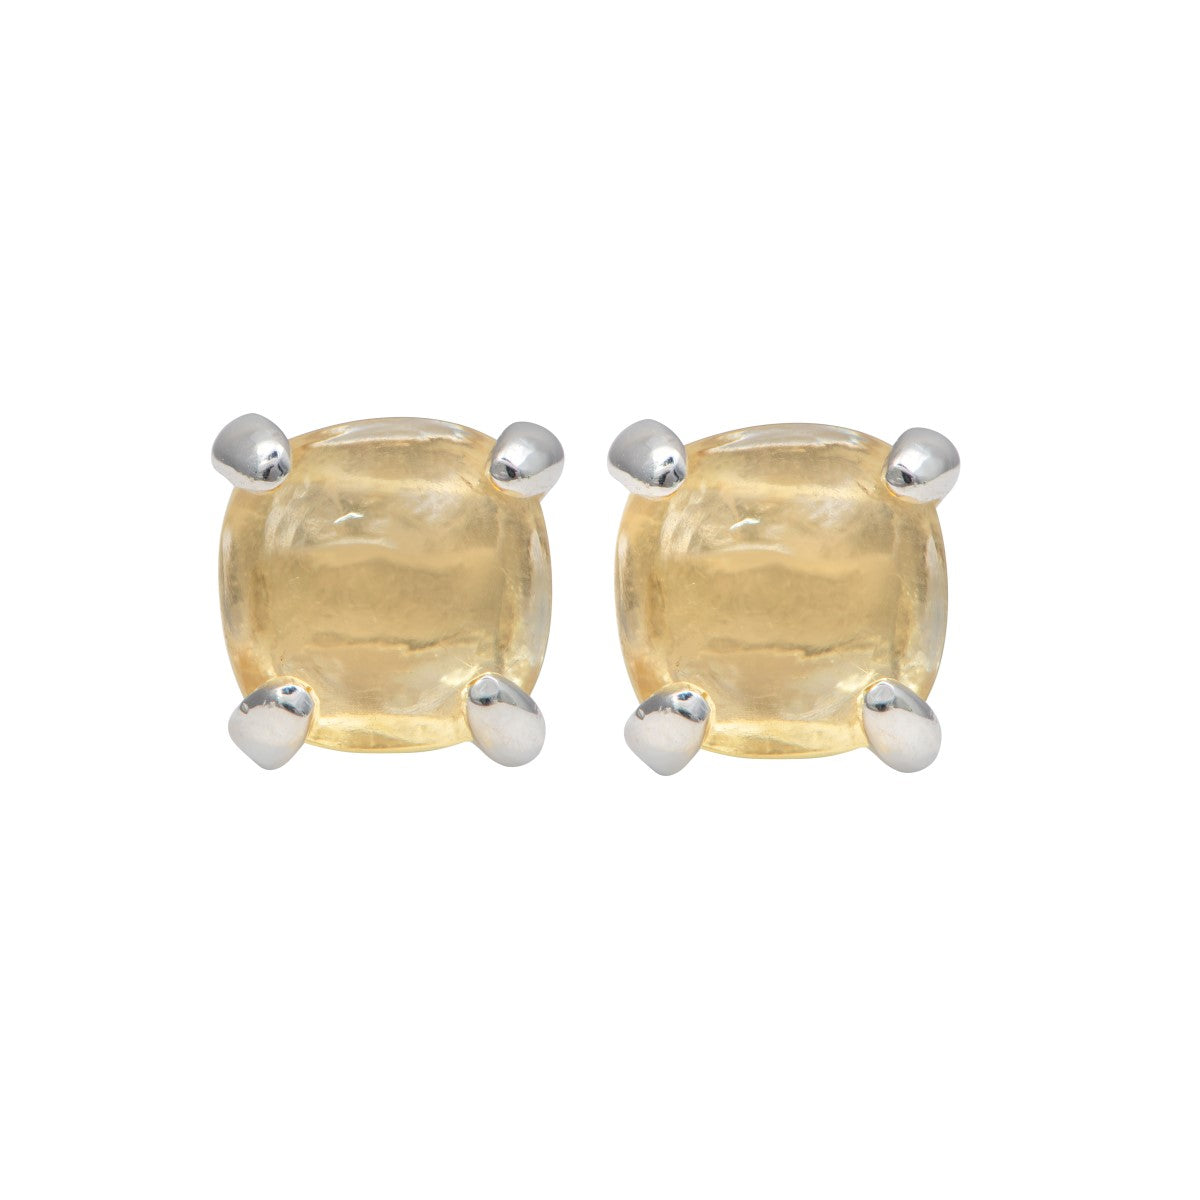 Square Cabochon Citrine Stud Earrings in Sterling Silver